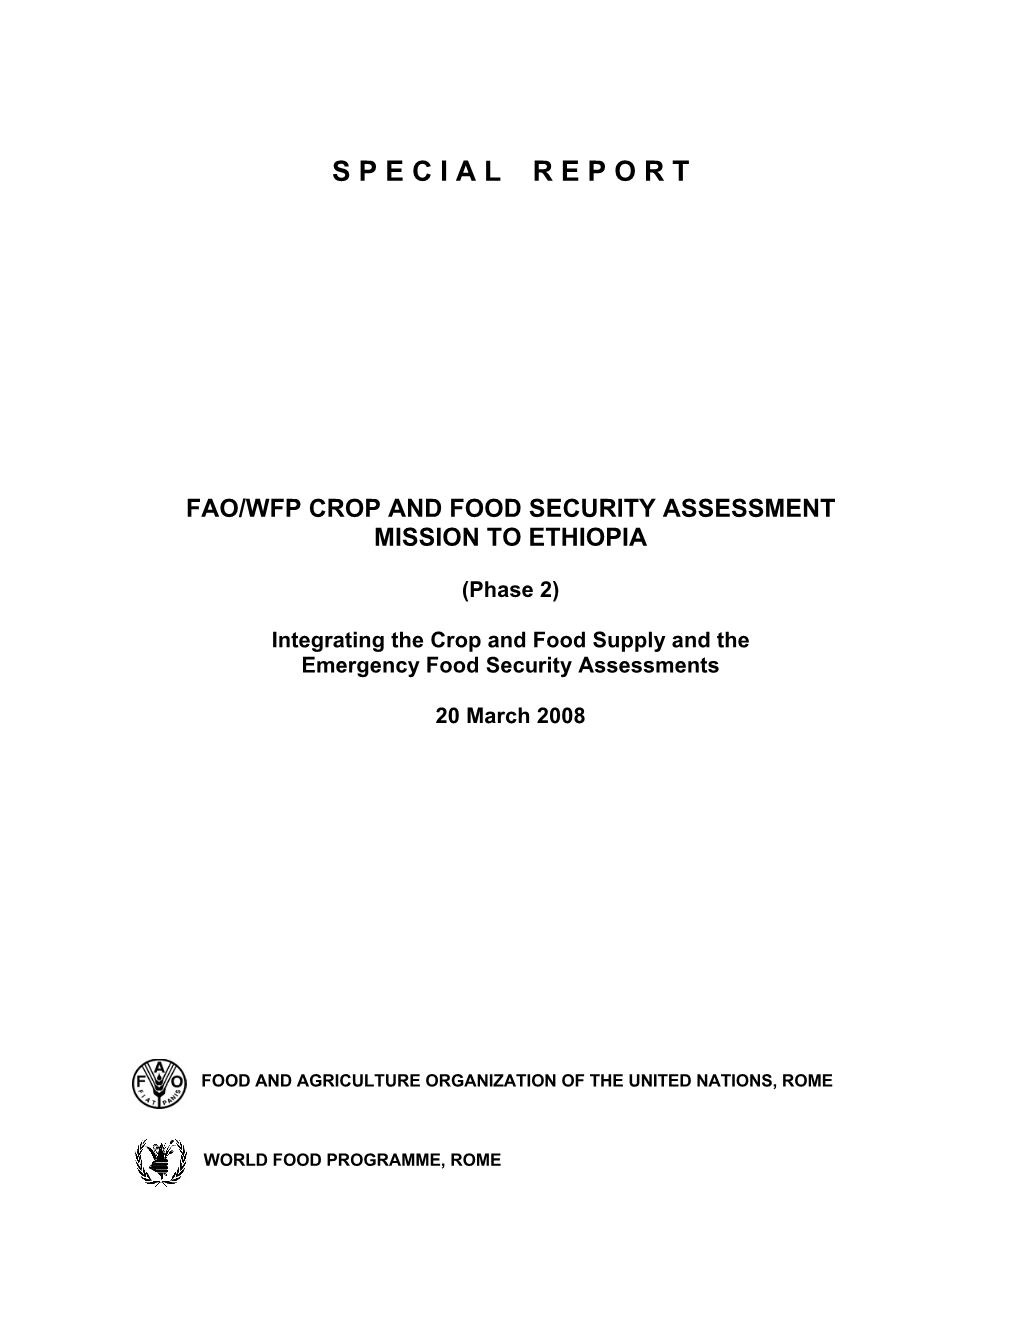 Fao/Wfp Crop and Food Security Assessment Mission to Ethiopia